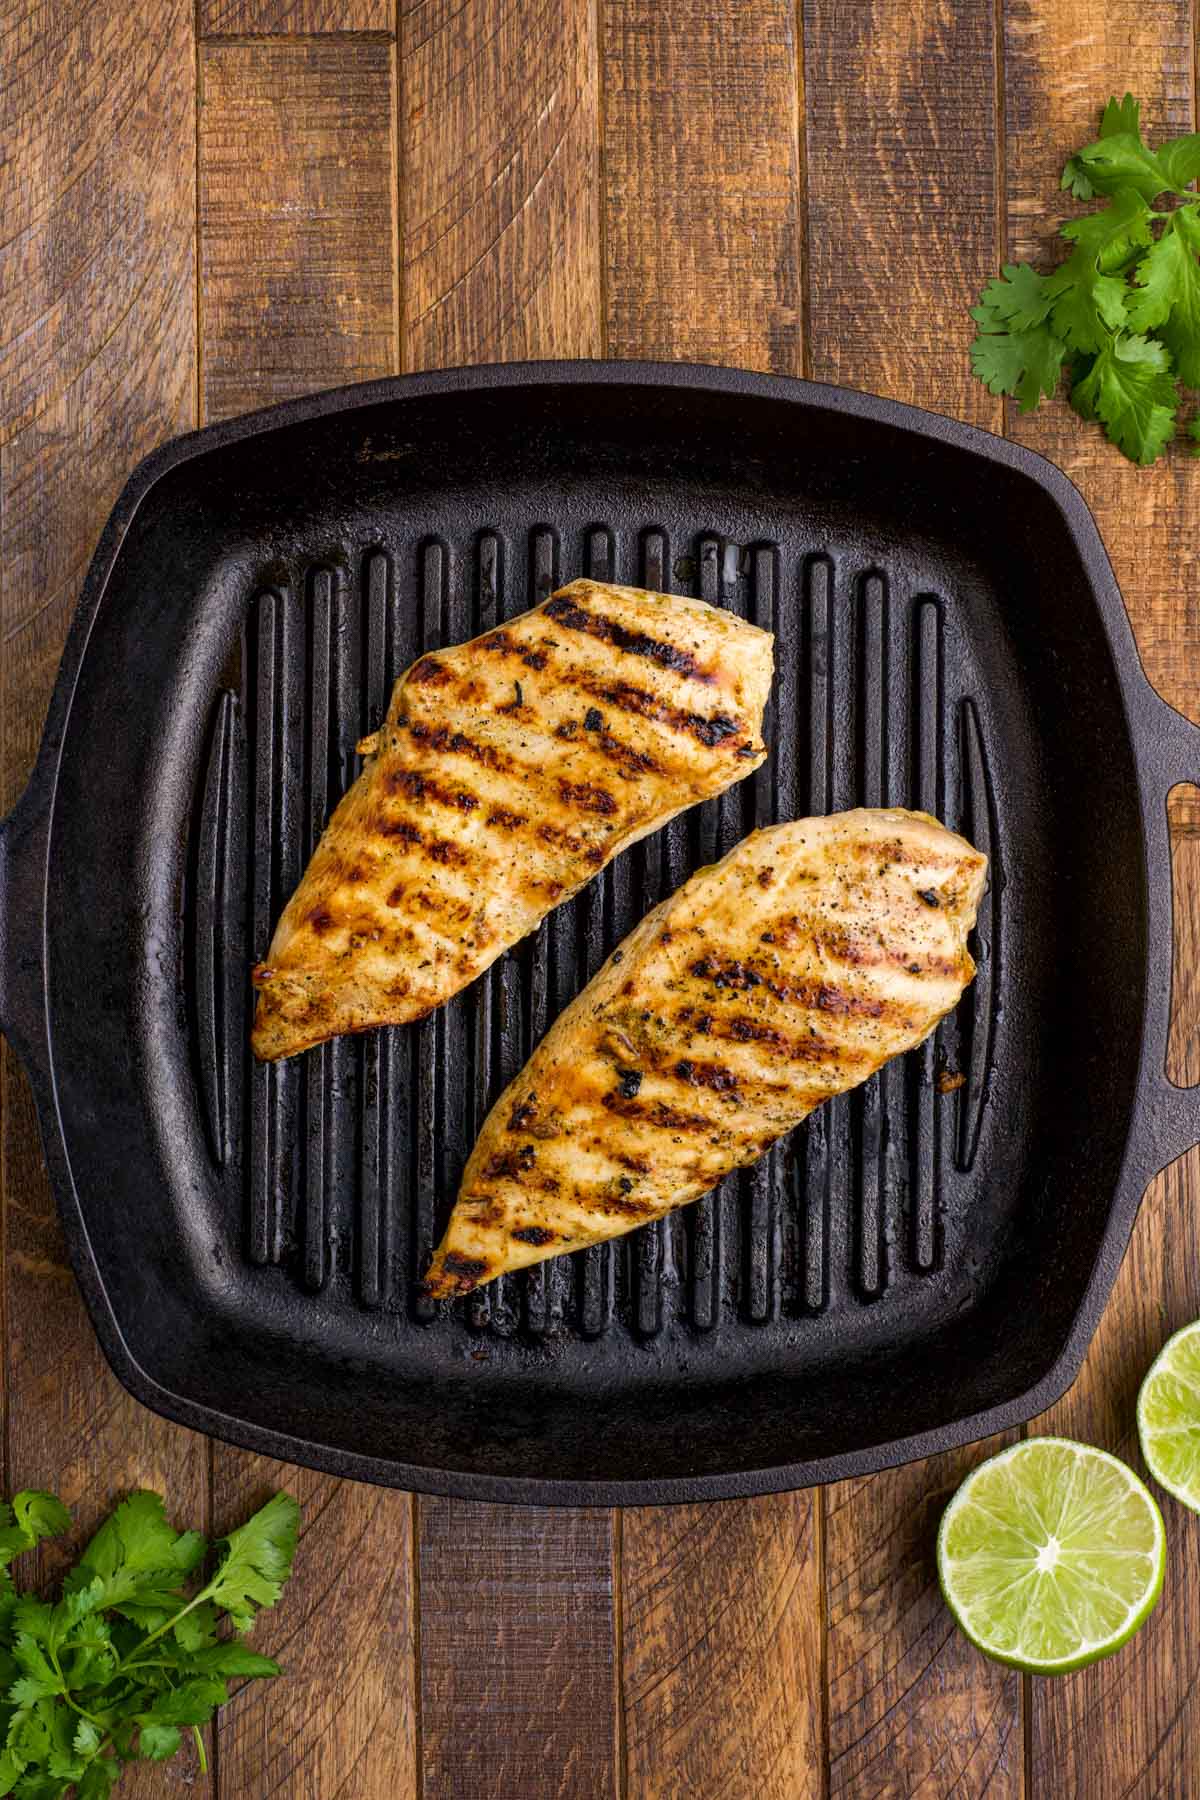 Grilled chicken in a grill pan.